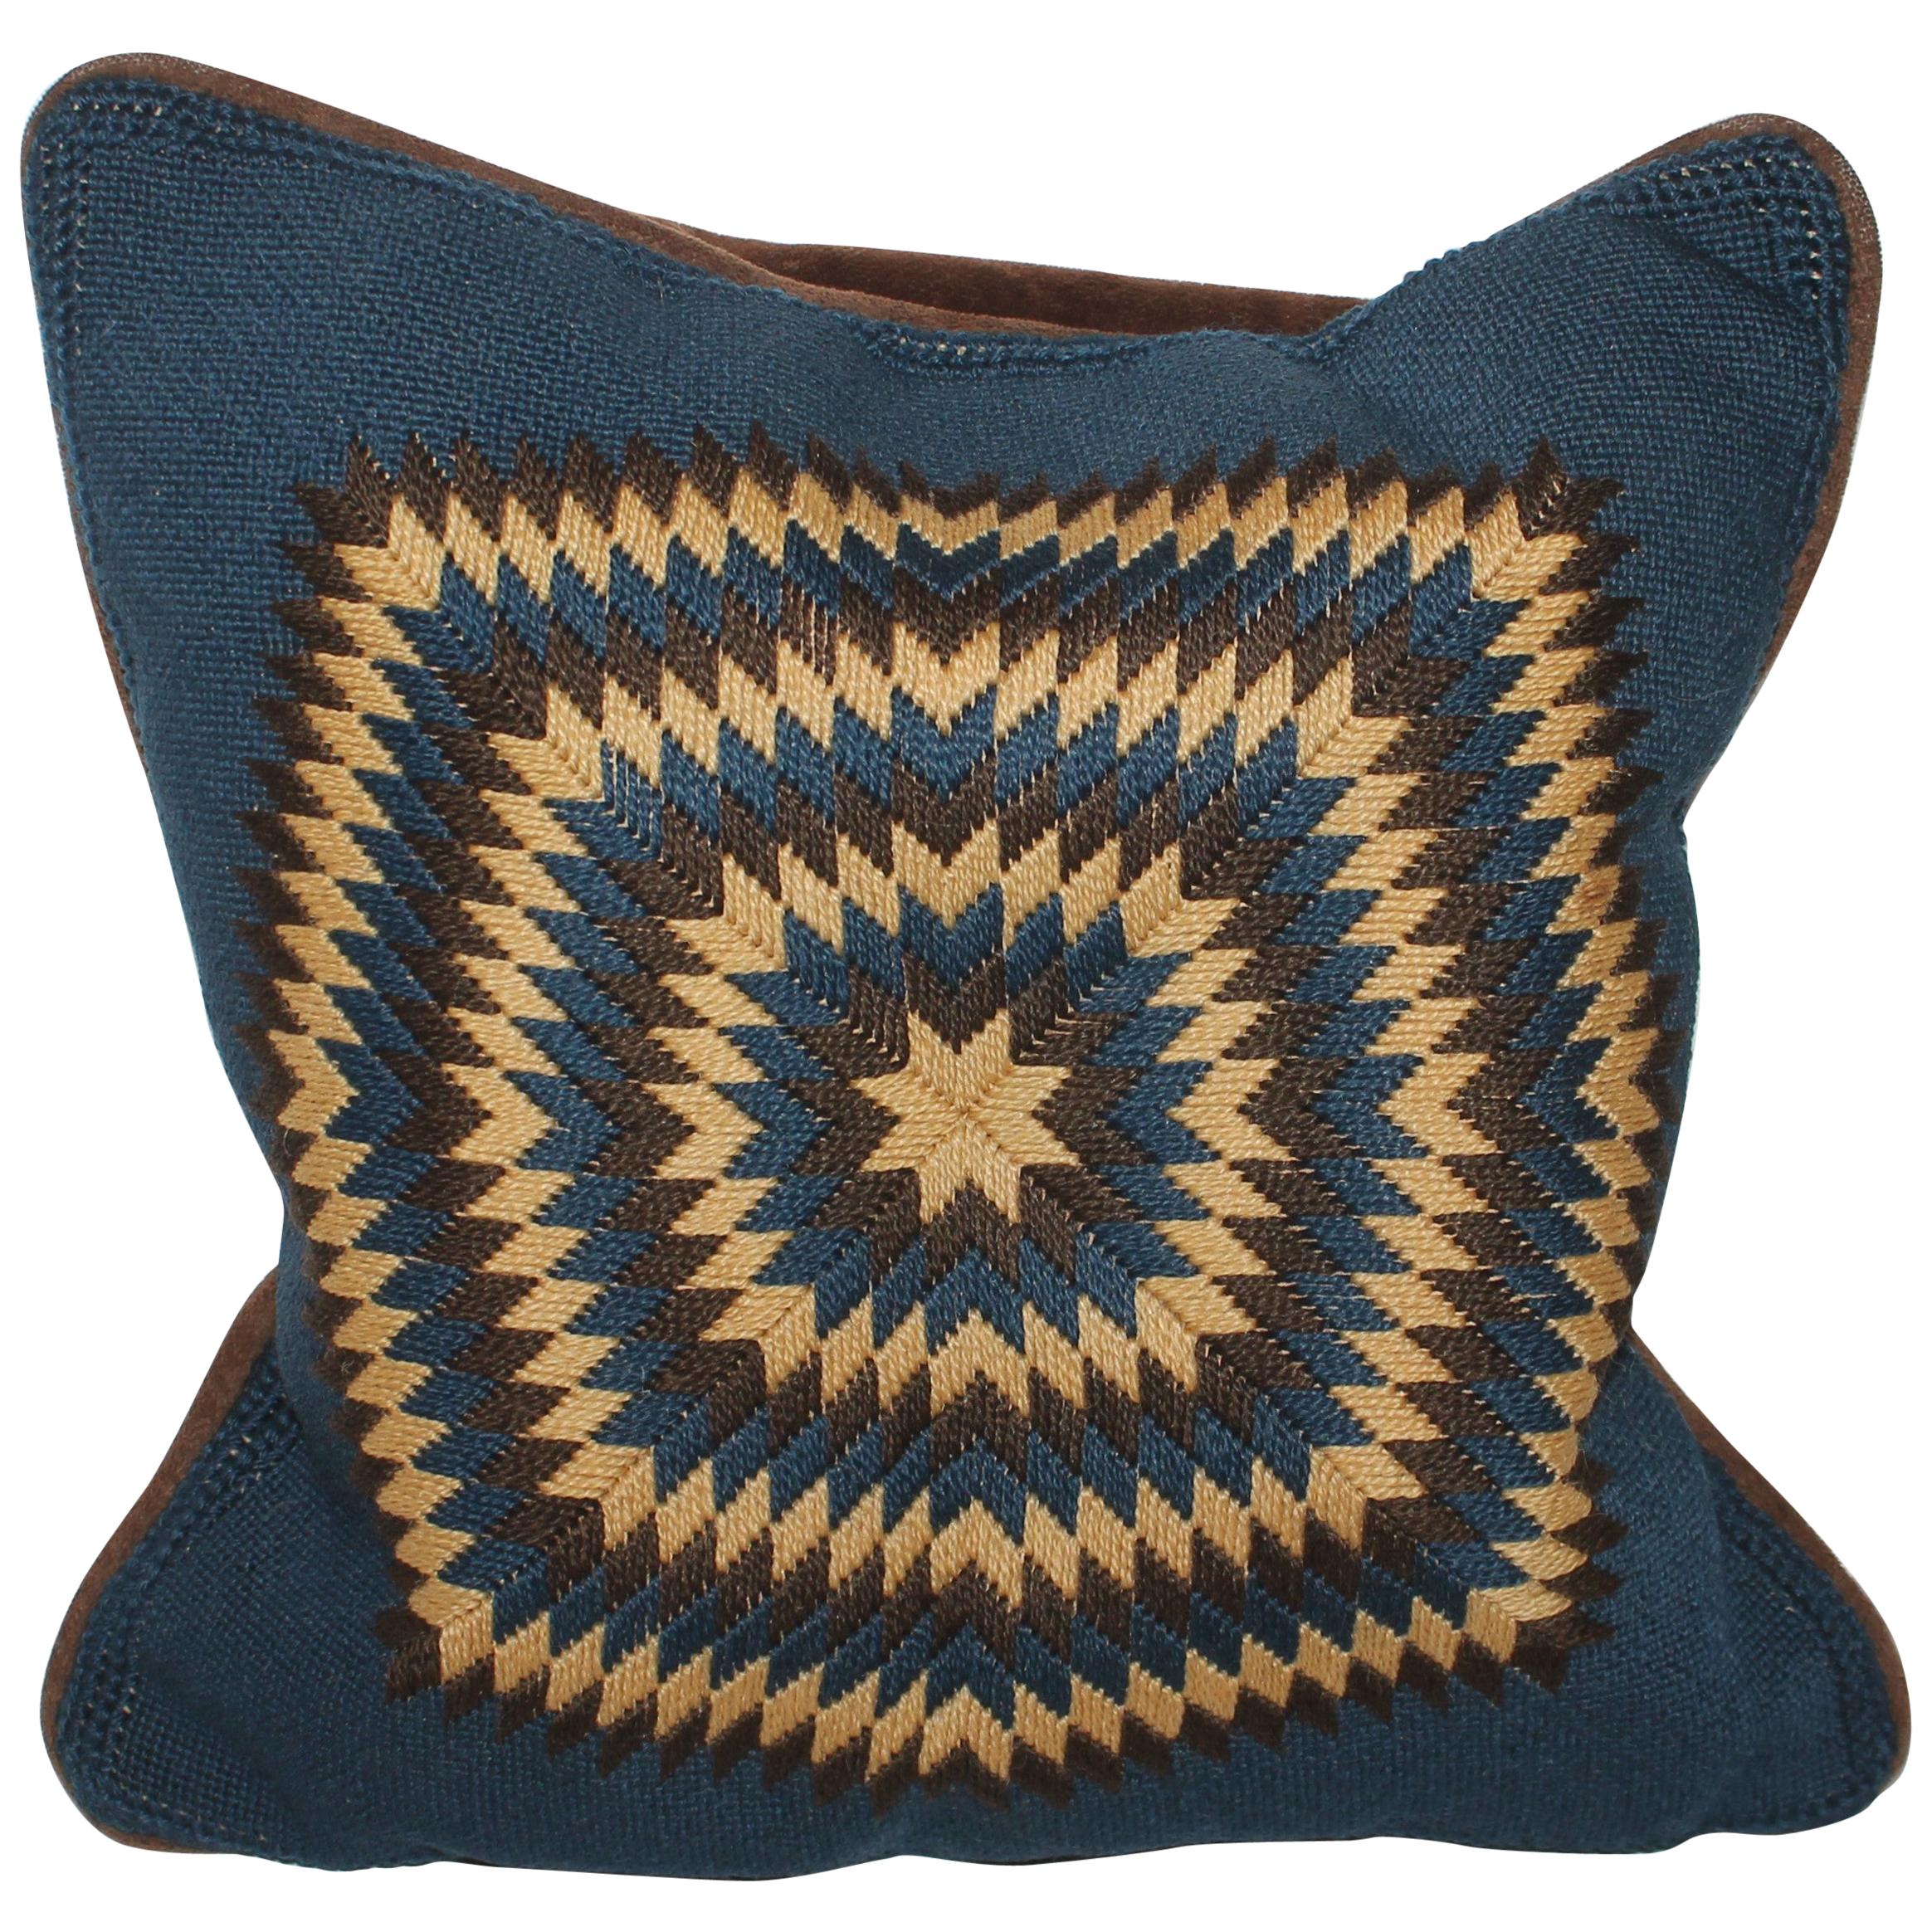 Early 20Thc Hand Knit Starburst Pillow